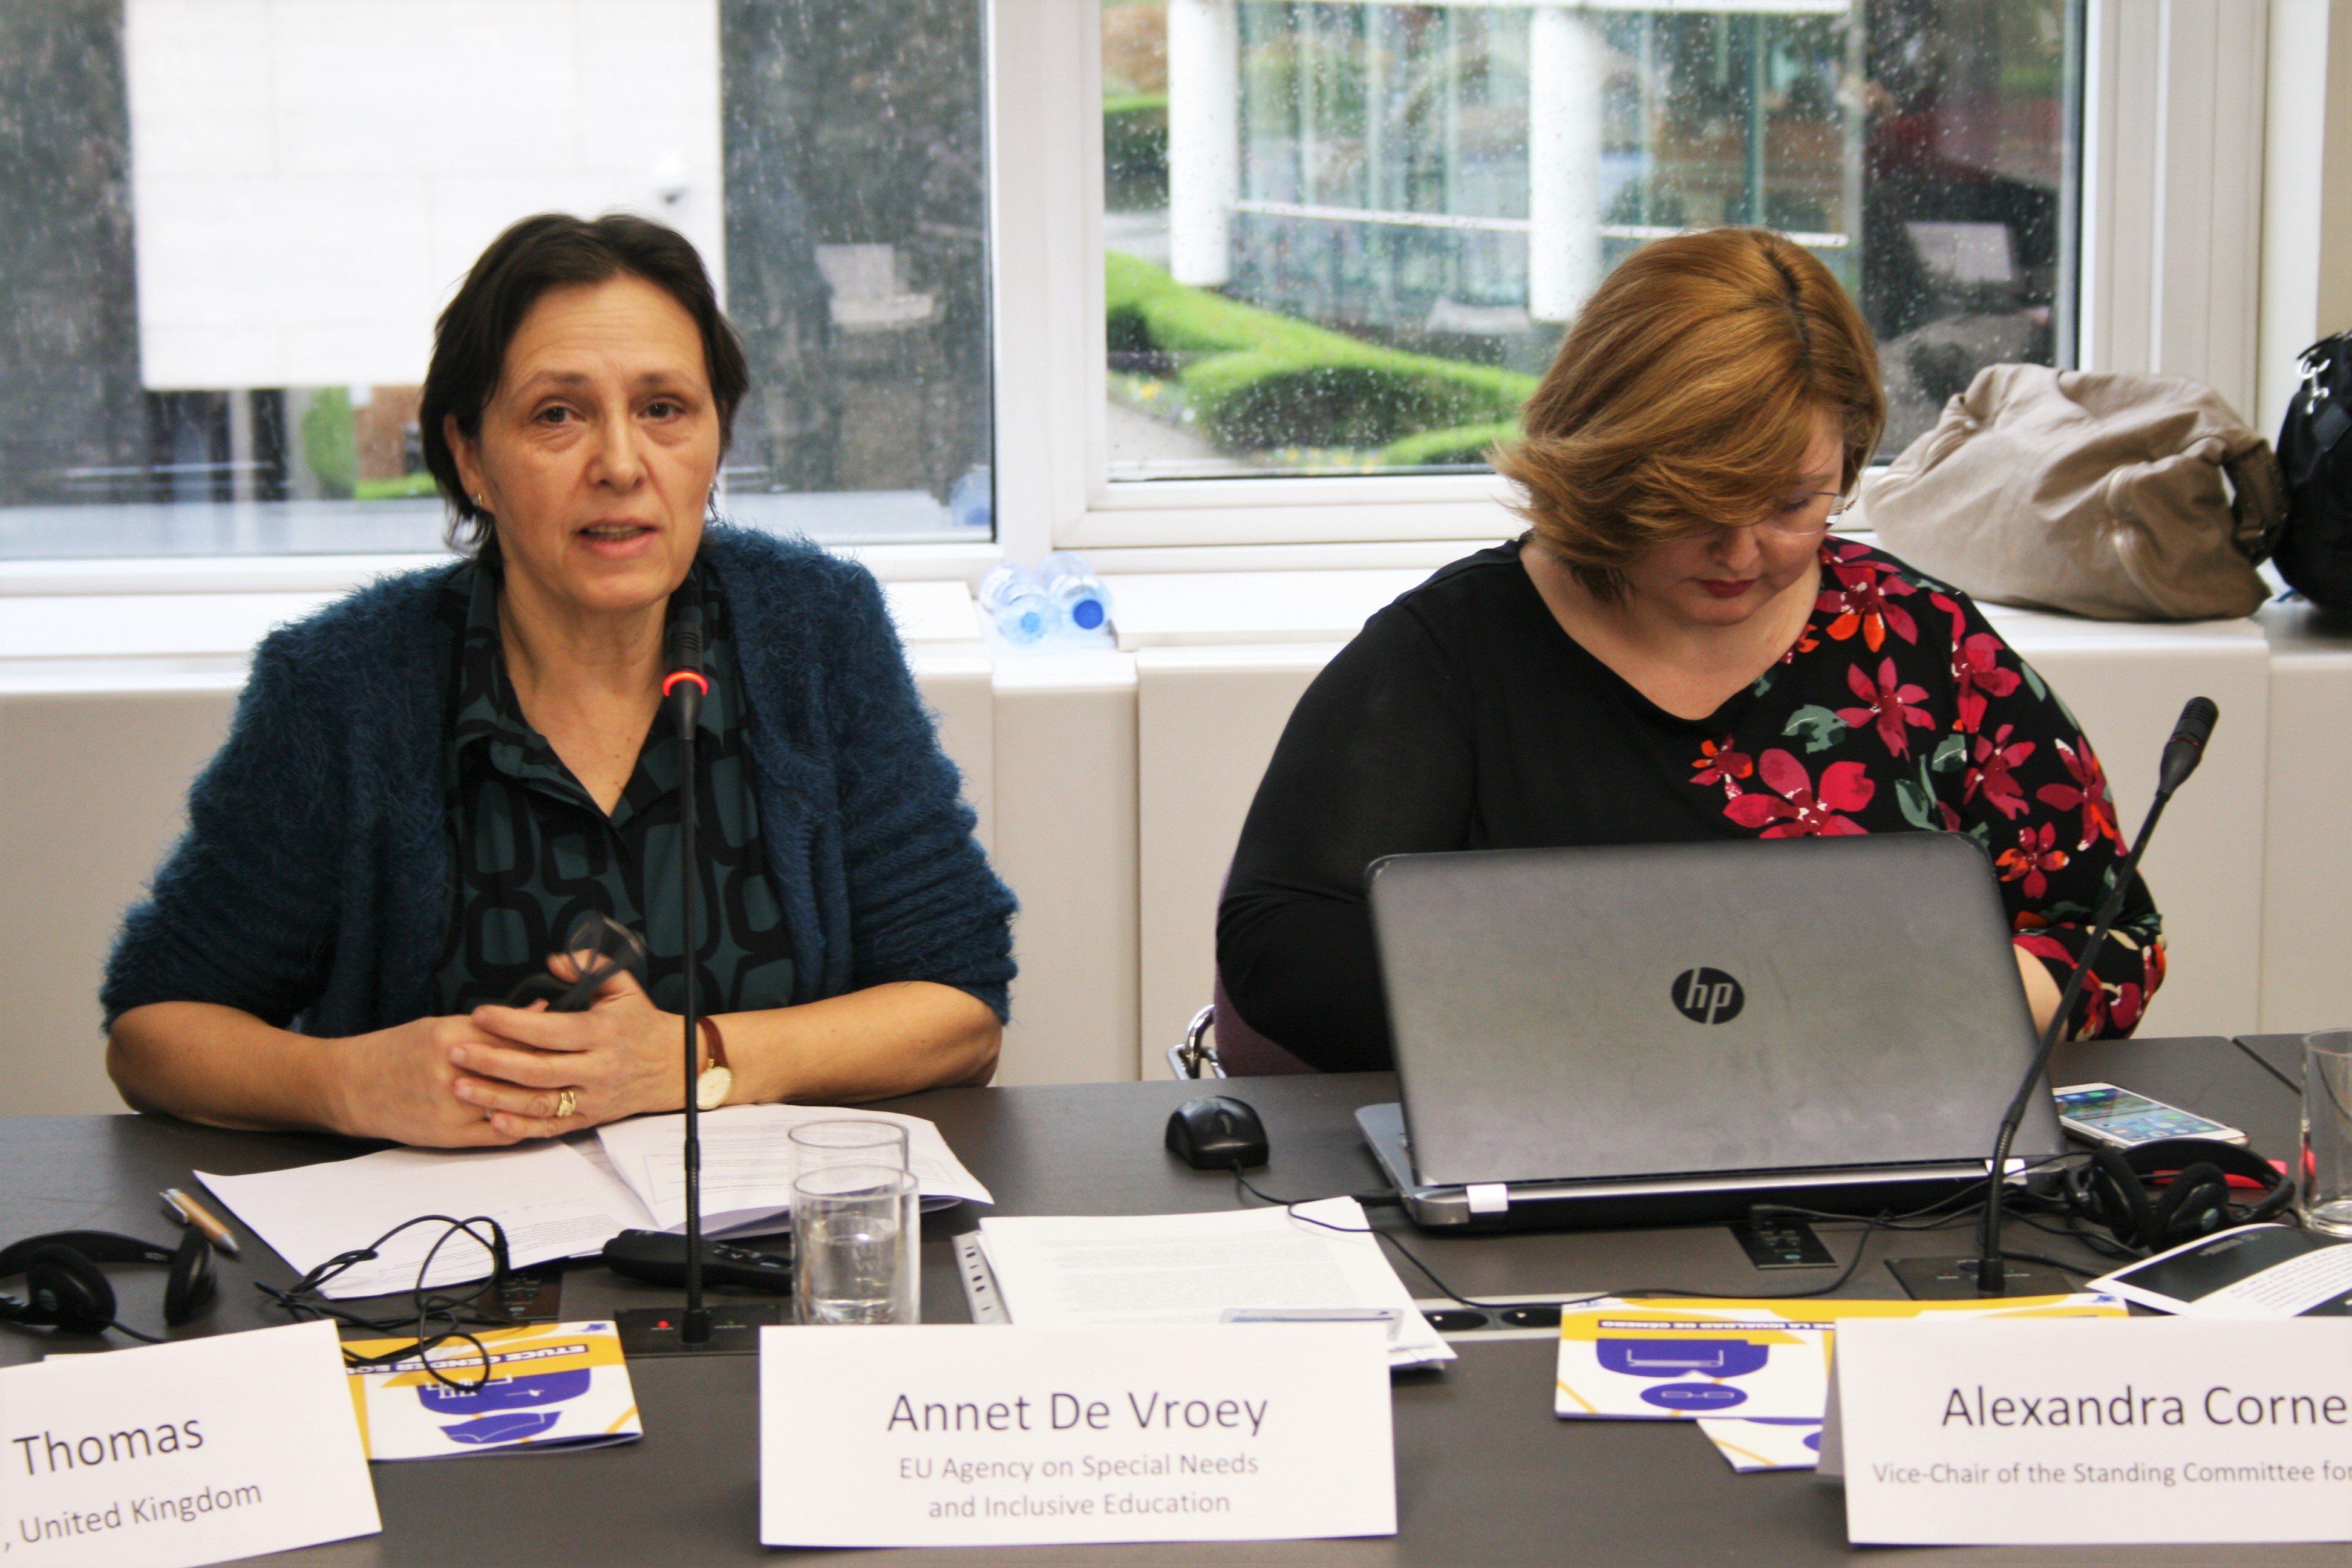 Agency participation in ETUCE Standing Committee for Equality